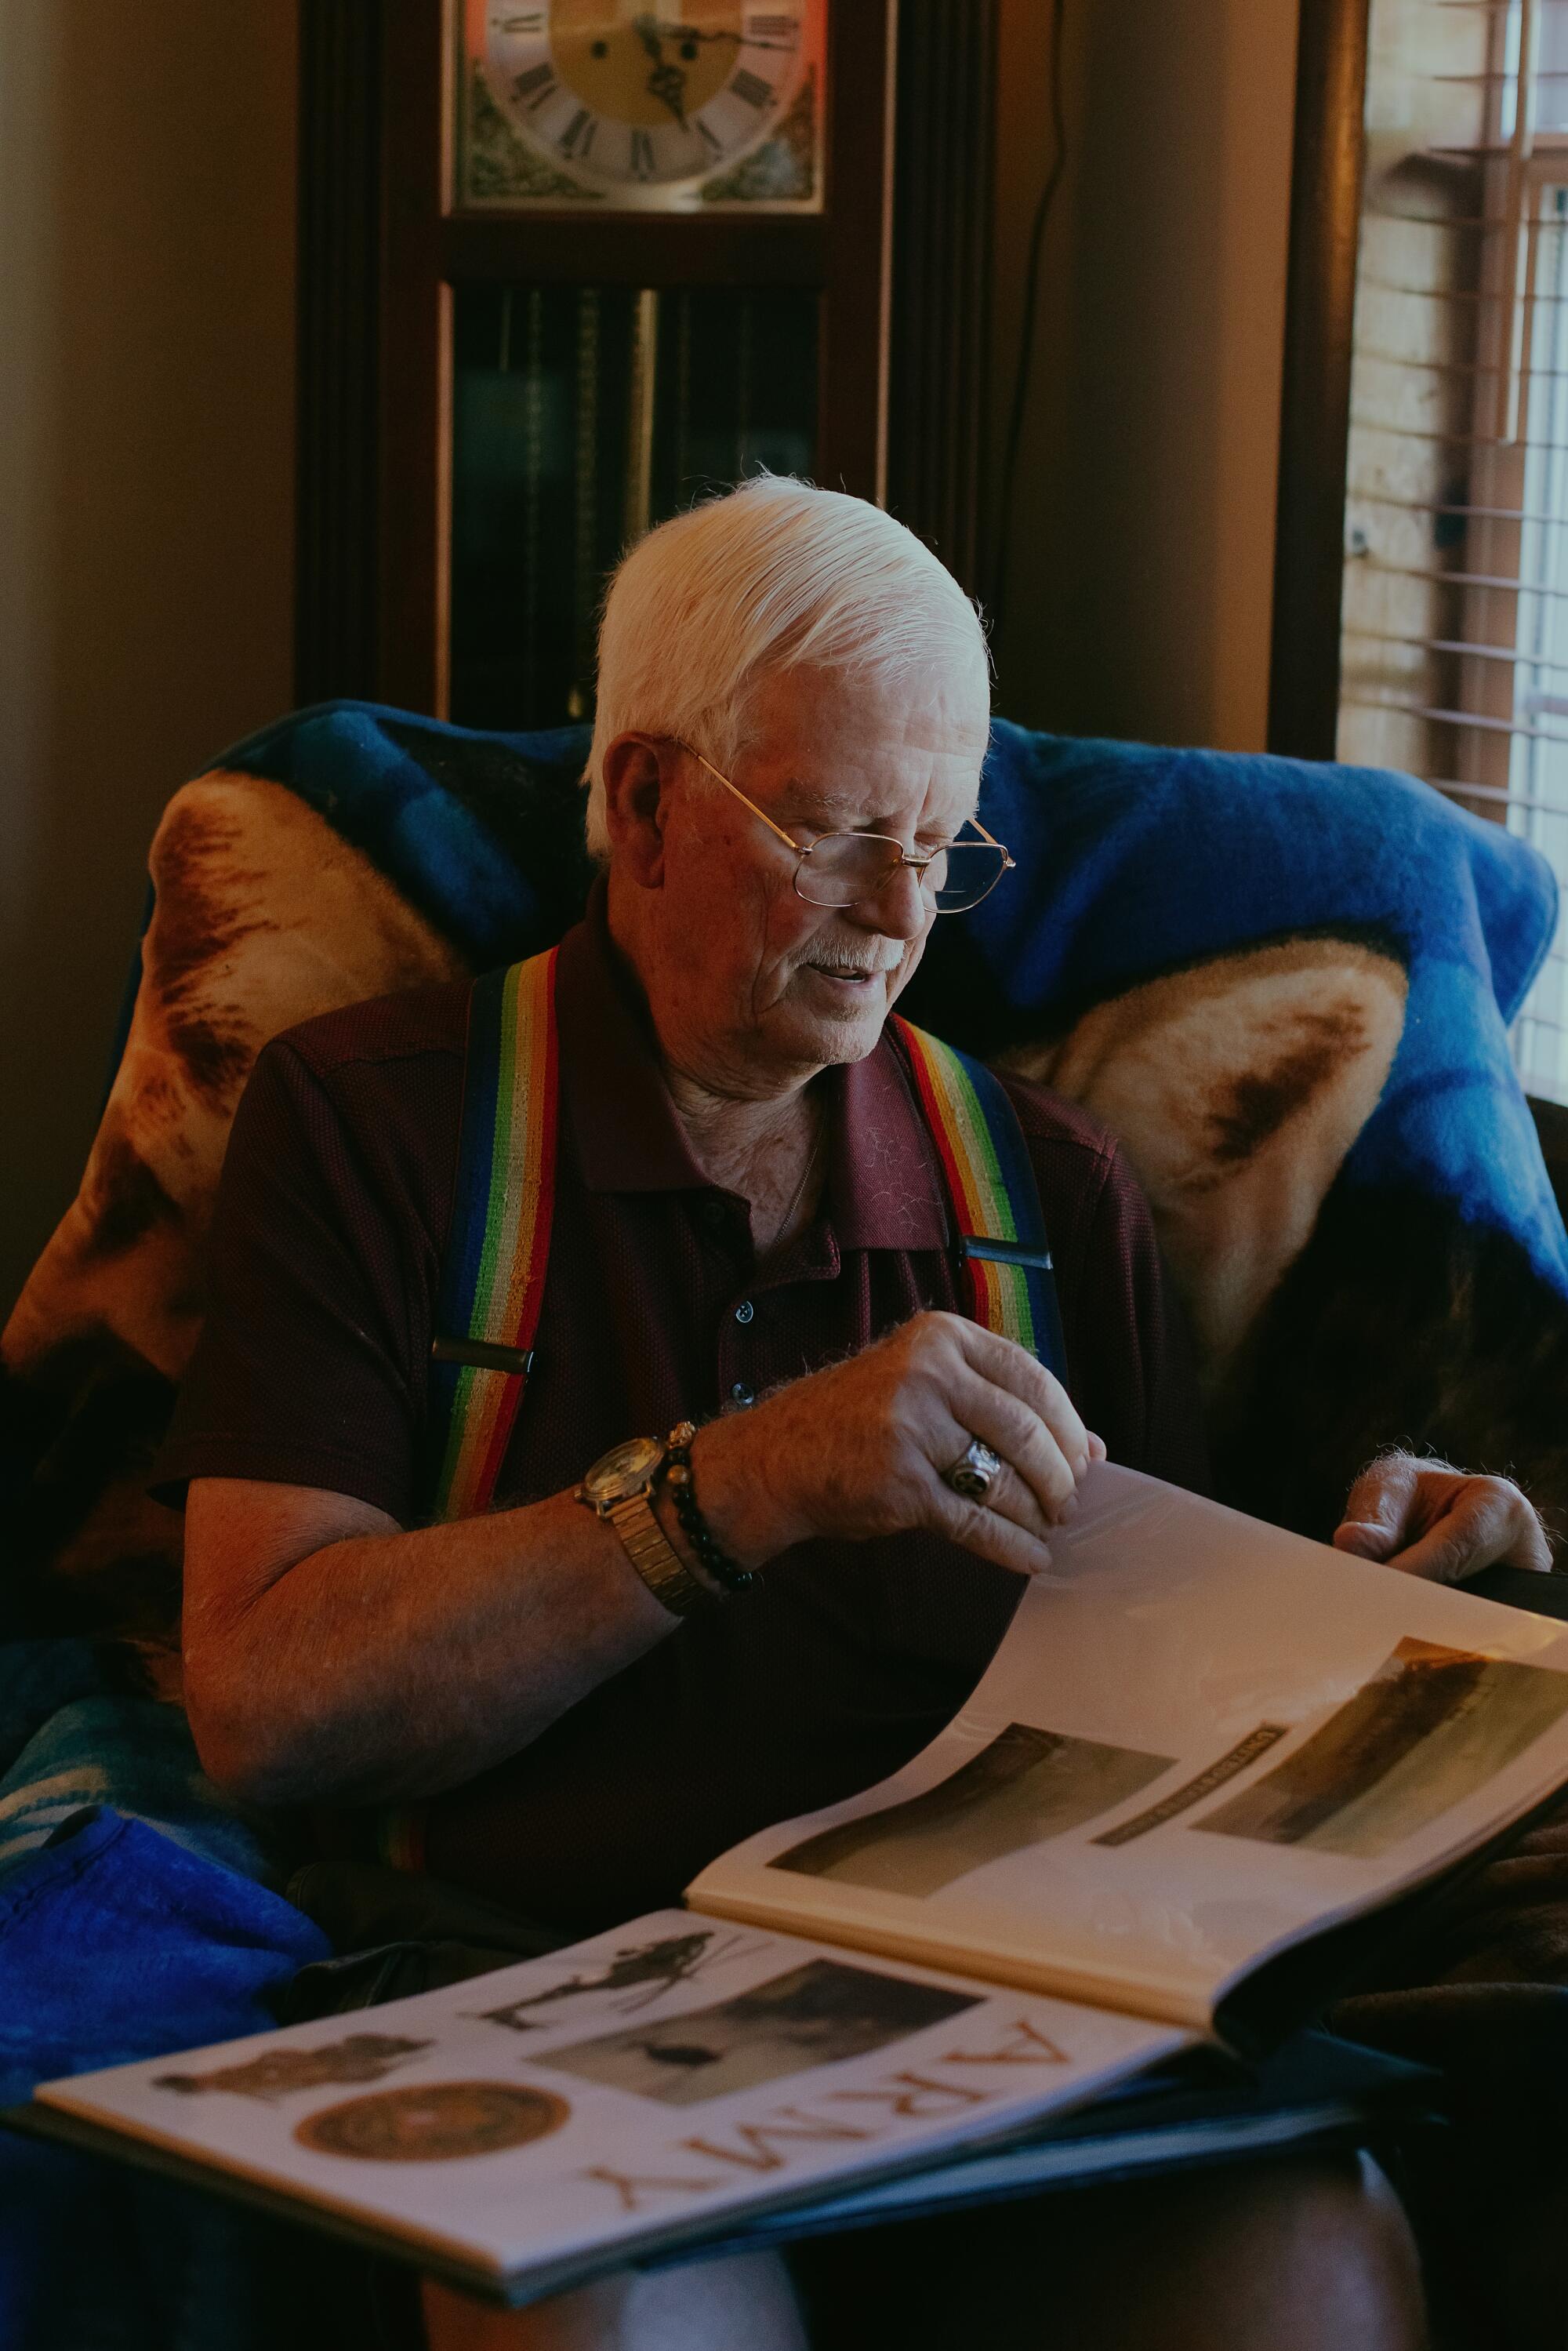 Gene Ulrich goes through an album of photos from his days in the Army at his home in Bunceton, Mo.